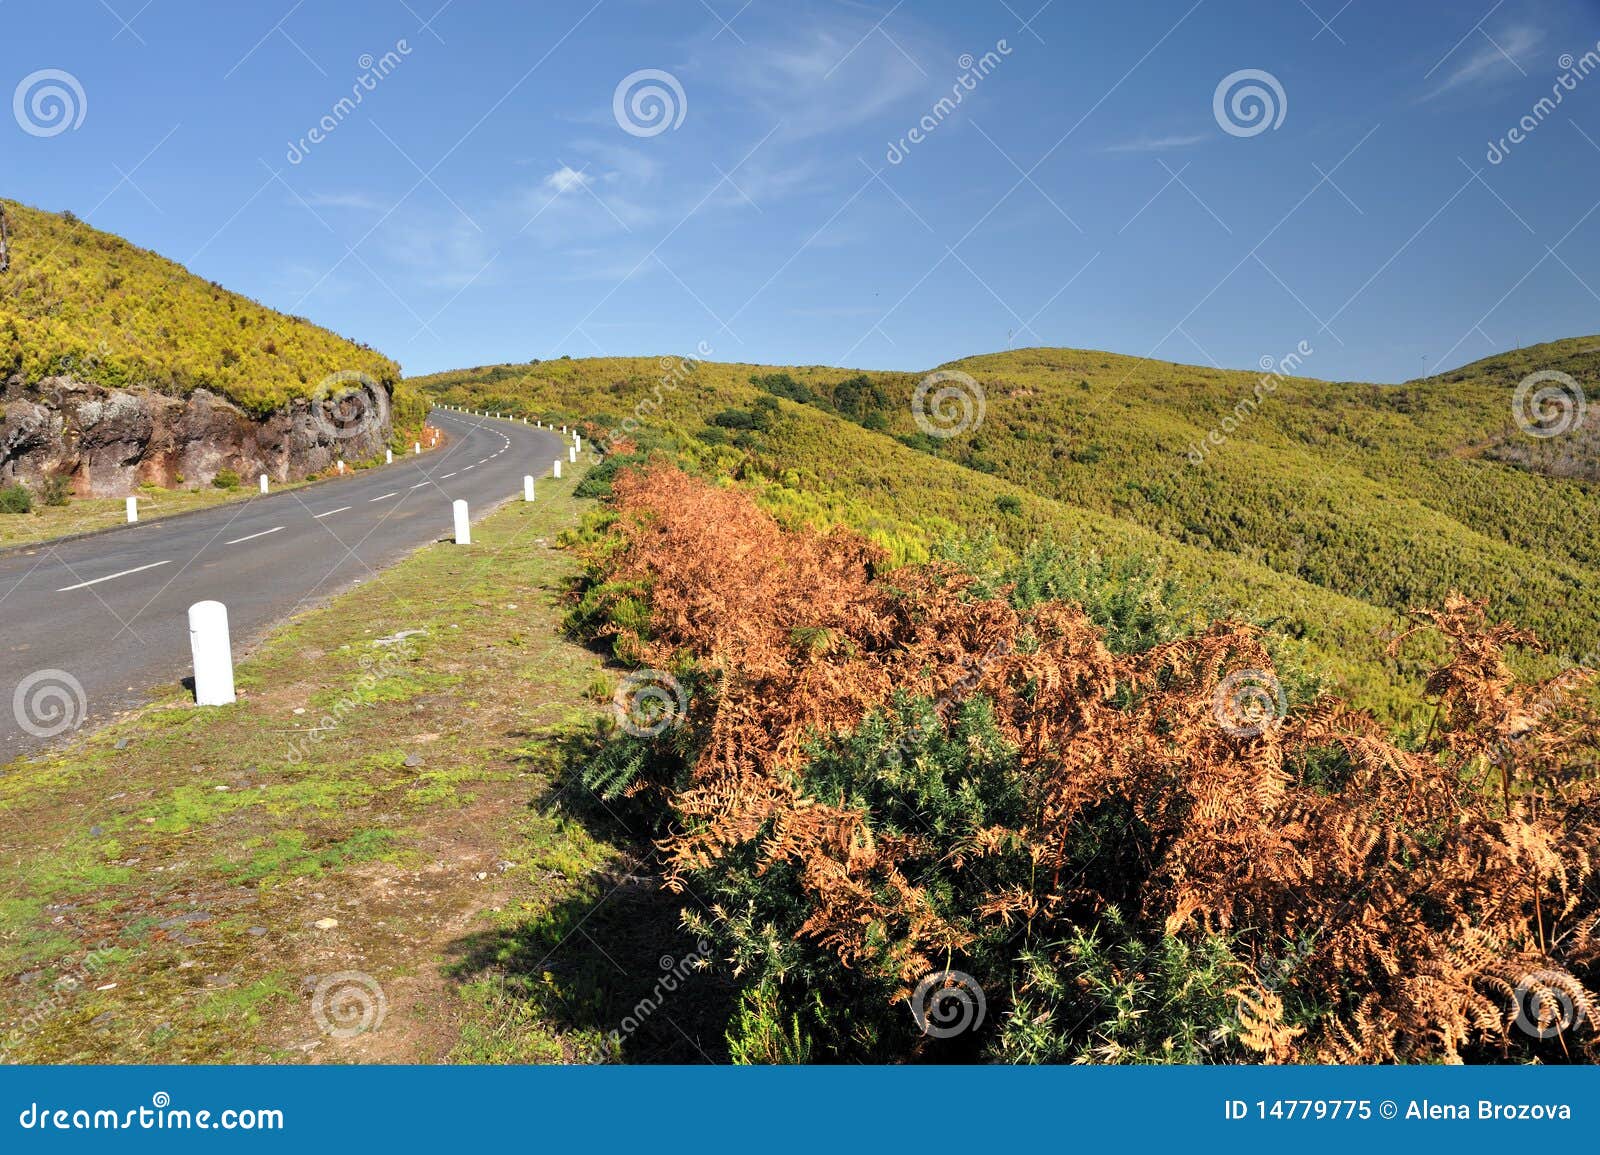 road in plateau of parque natural de madeira, made